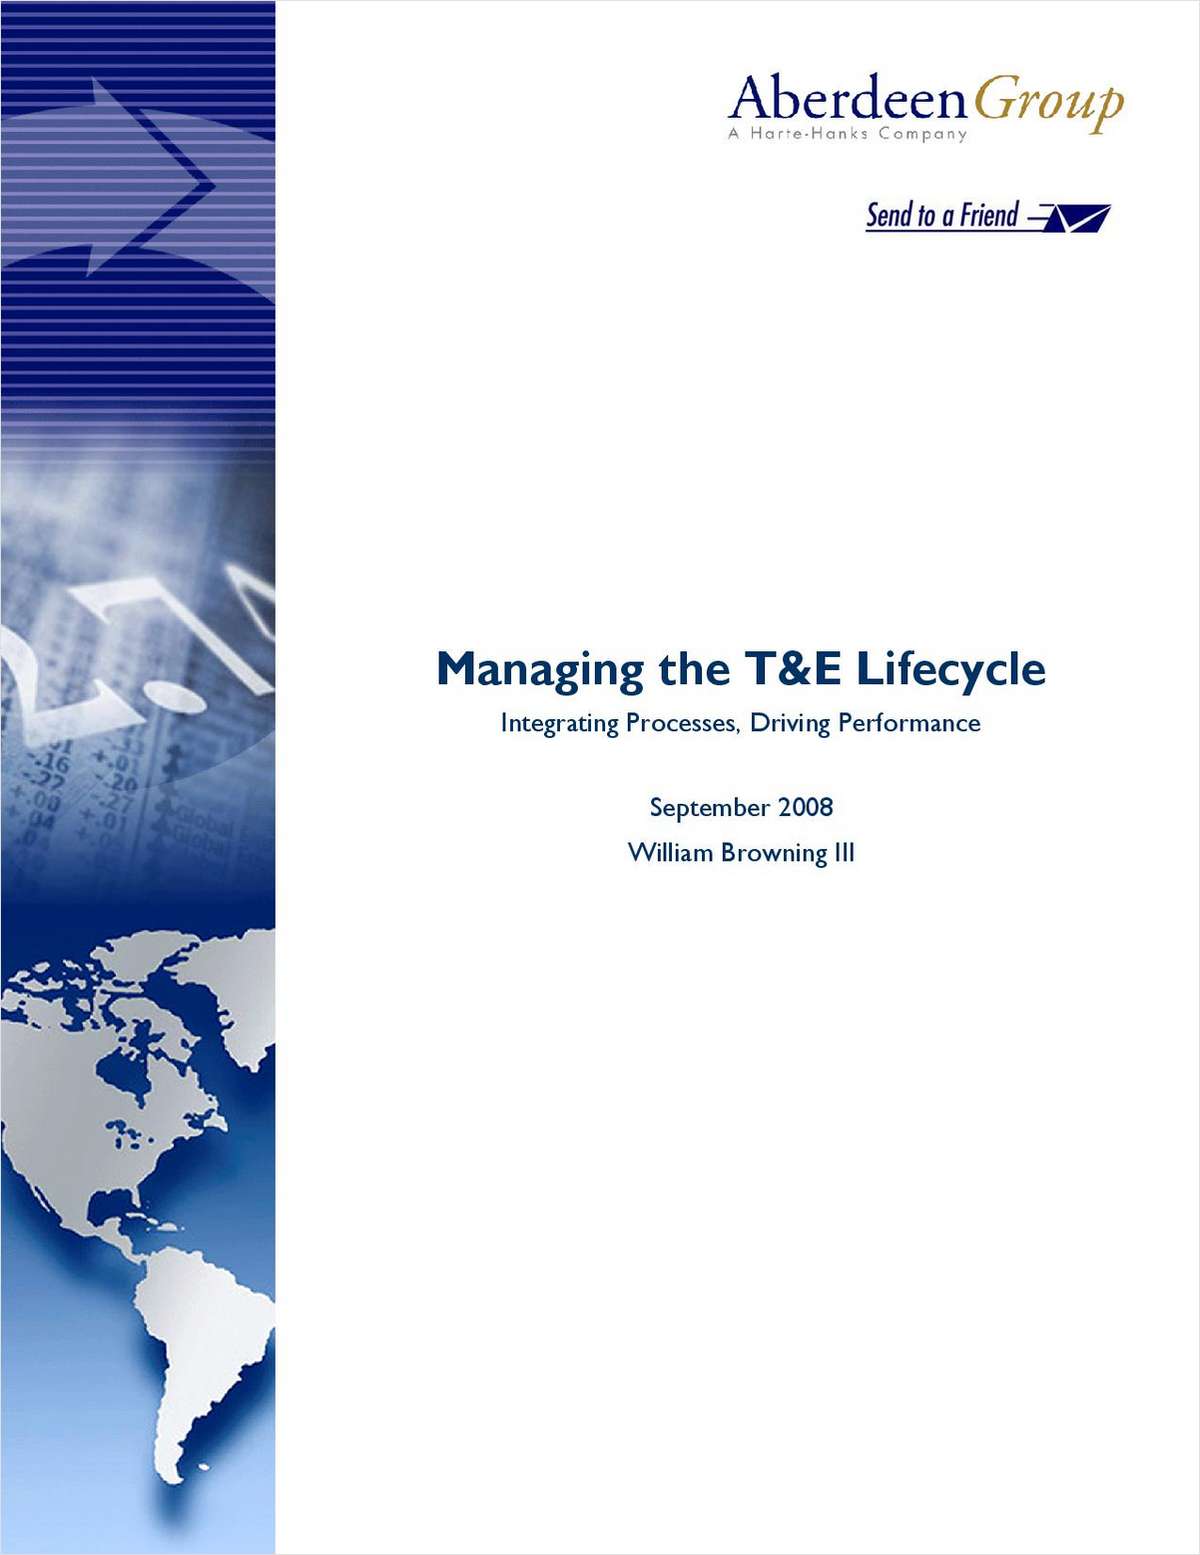 Managing the T&E Lifecycle: Integrating Processes, Driving Performance